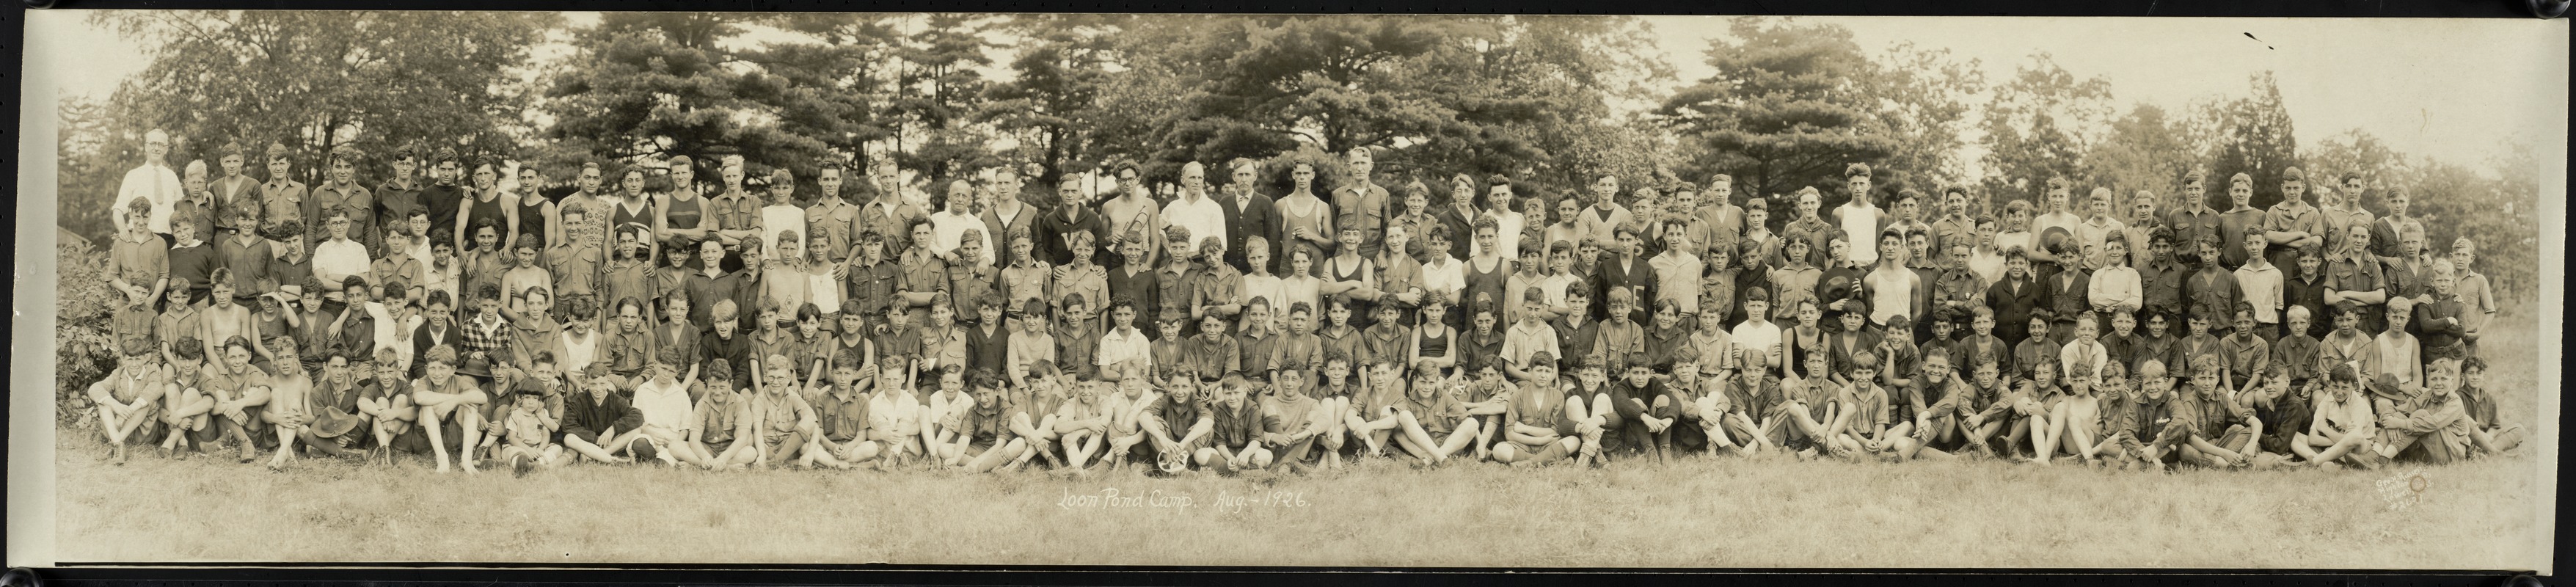 Boy Scouts of America, Camp Loon Pond, Lakeville, MA